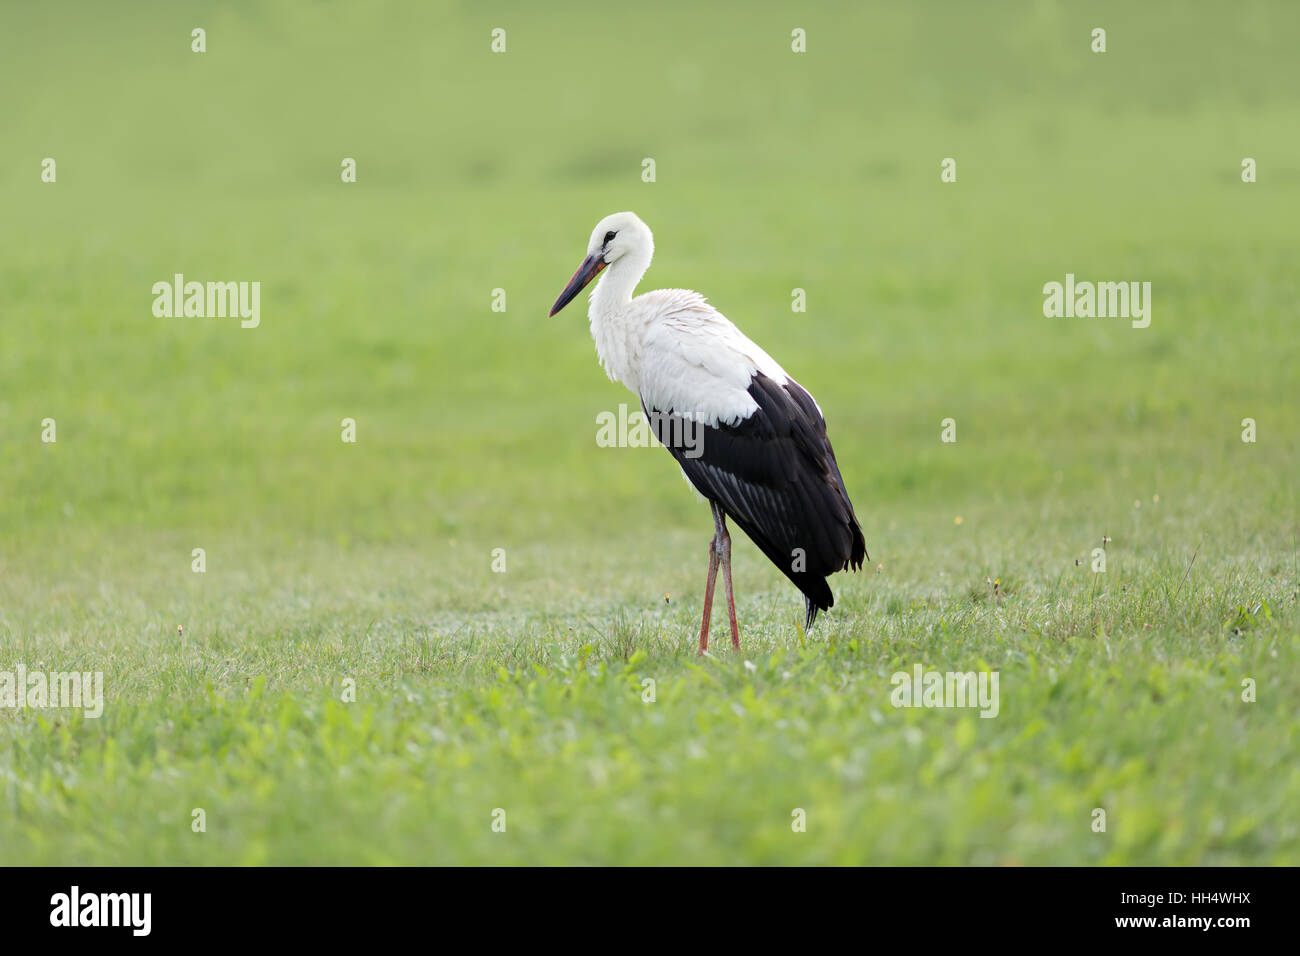 portrait of a stork in its natural habitat Stock Photo